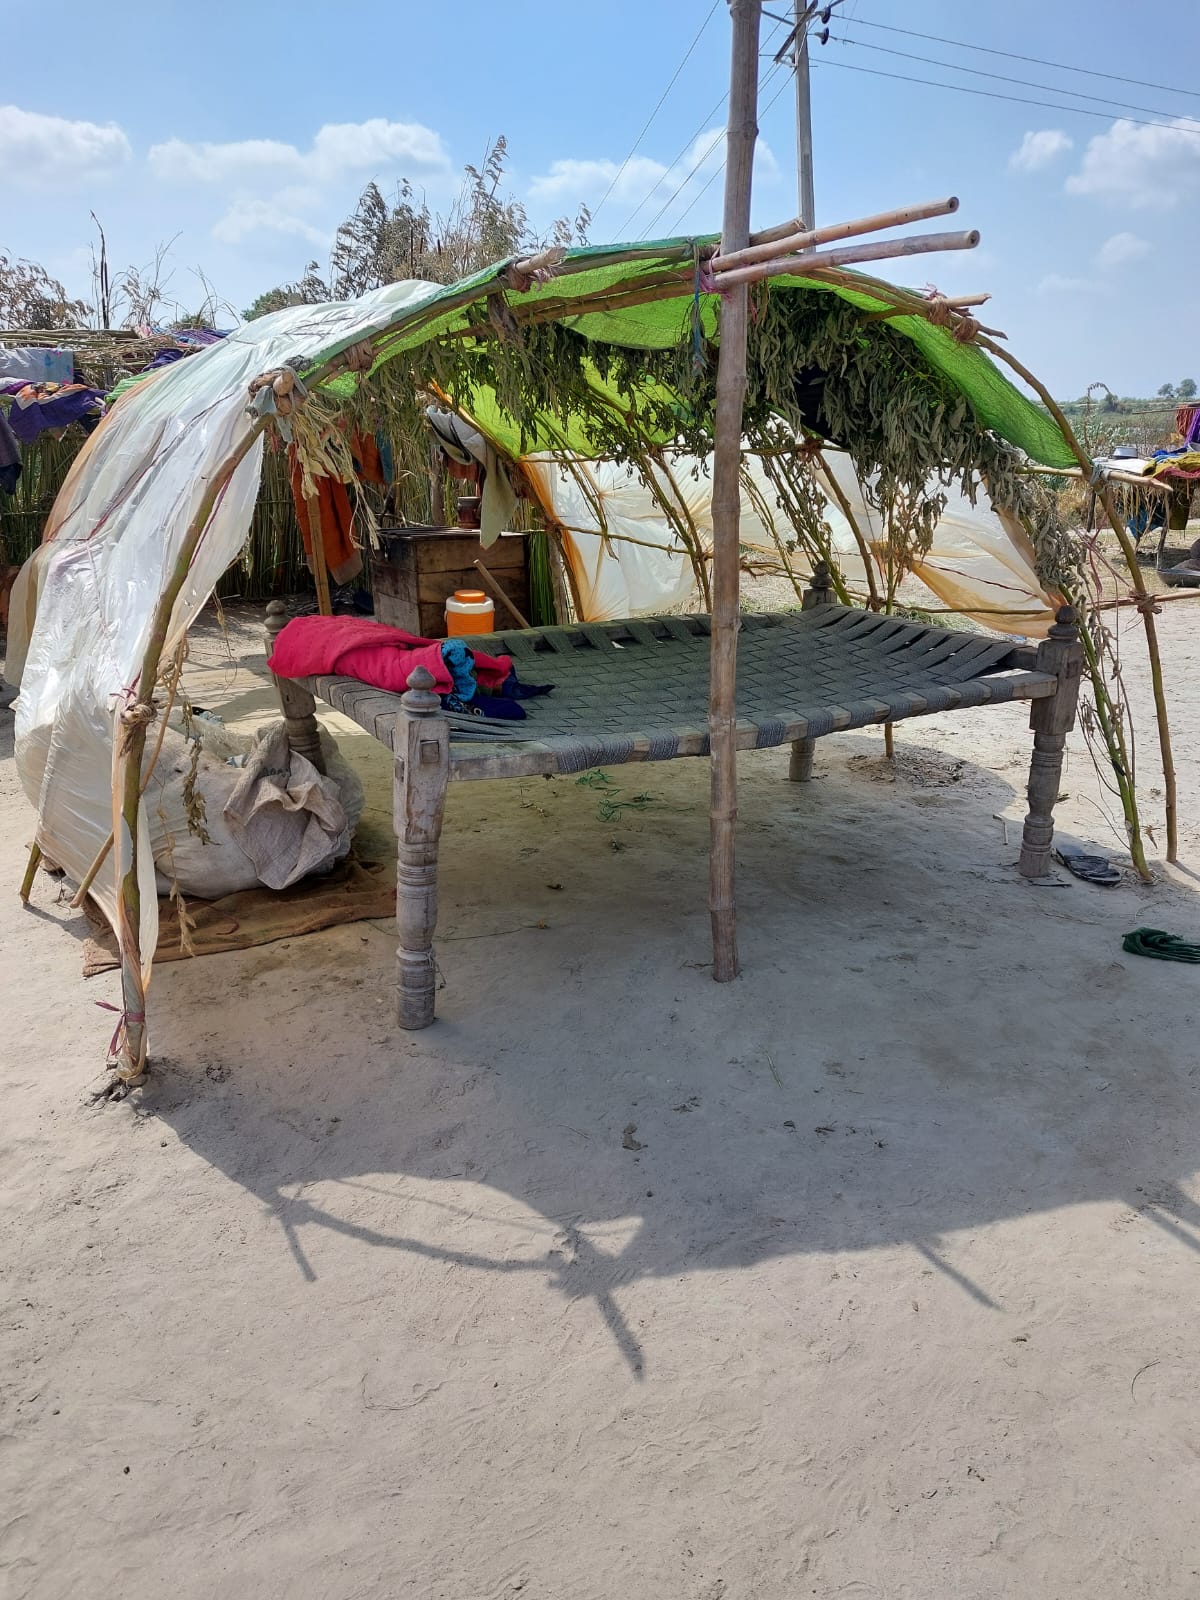 A makeshift shelter made of wooden poles and tarps.